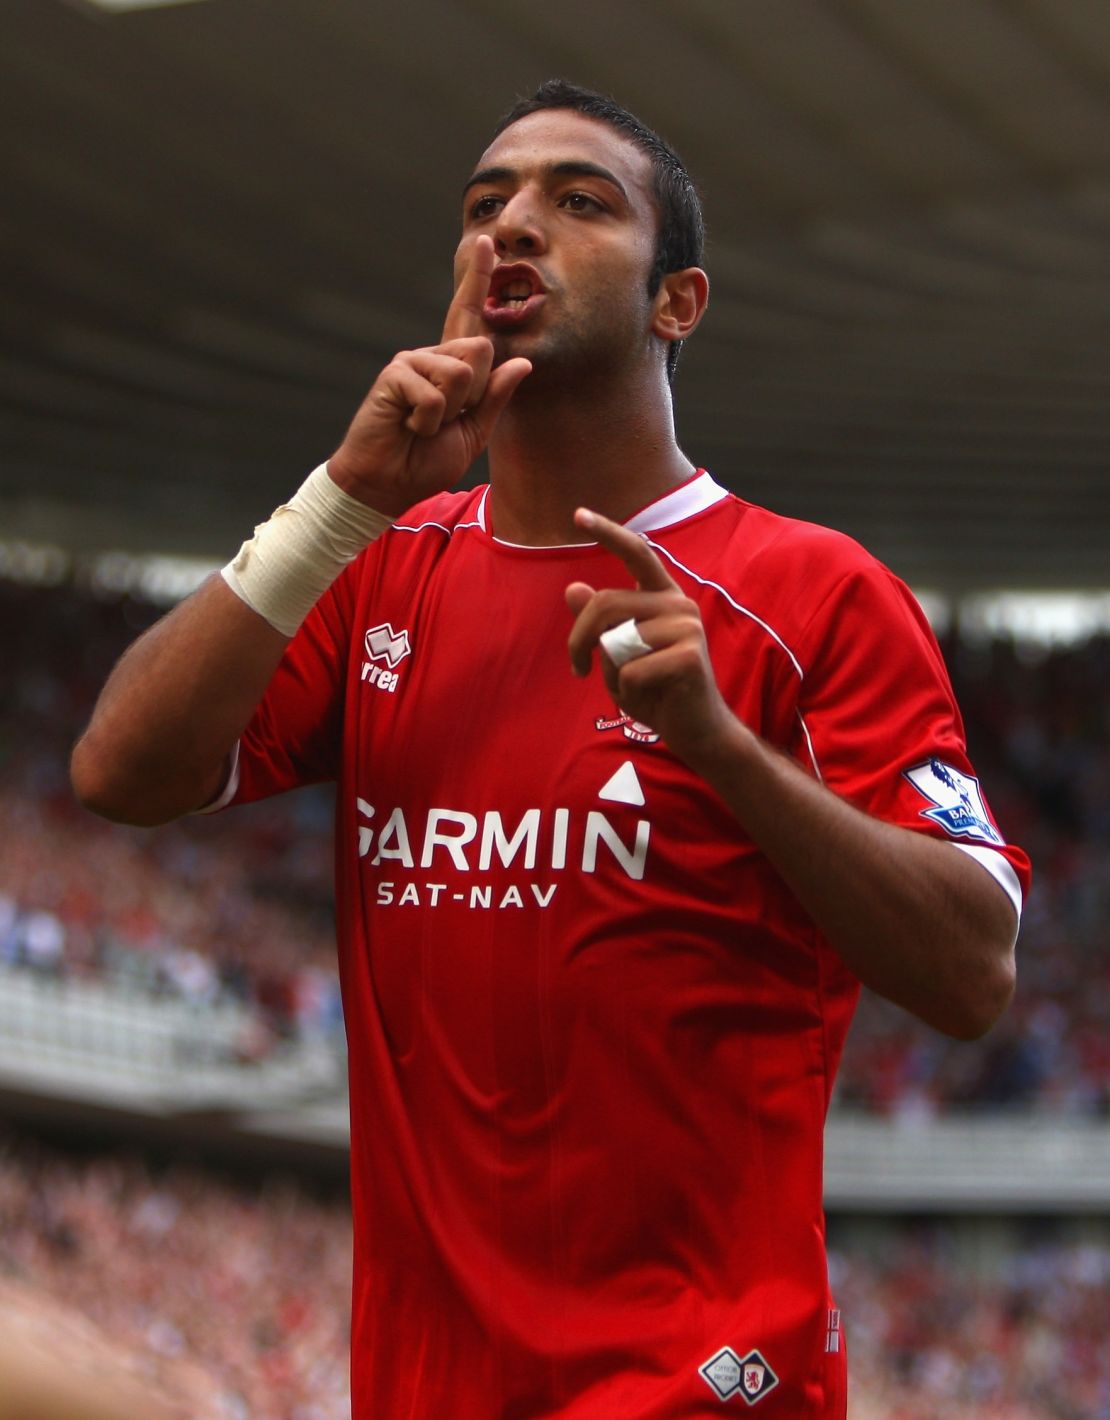 Mido says he expects Liverpool to lose games once it wins EPL title. 